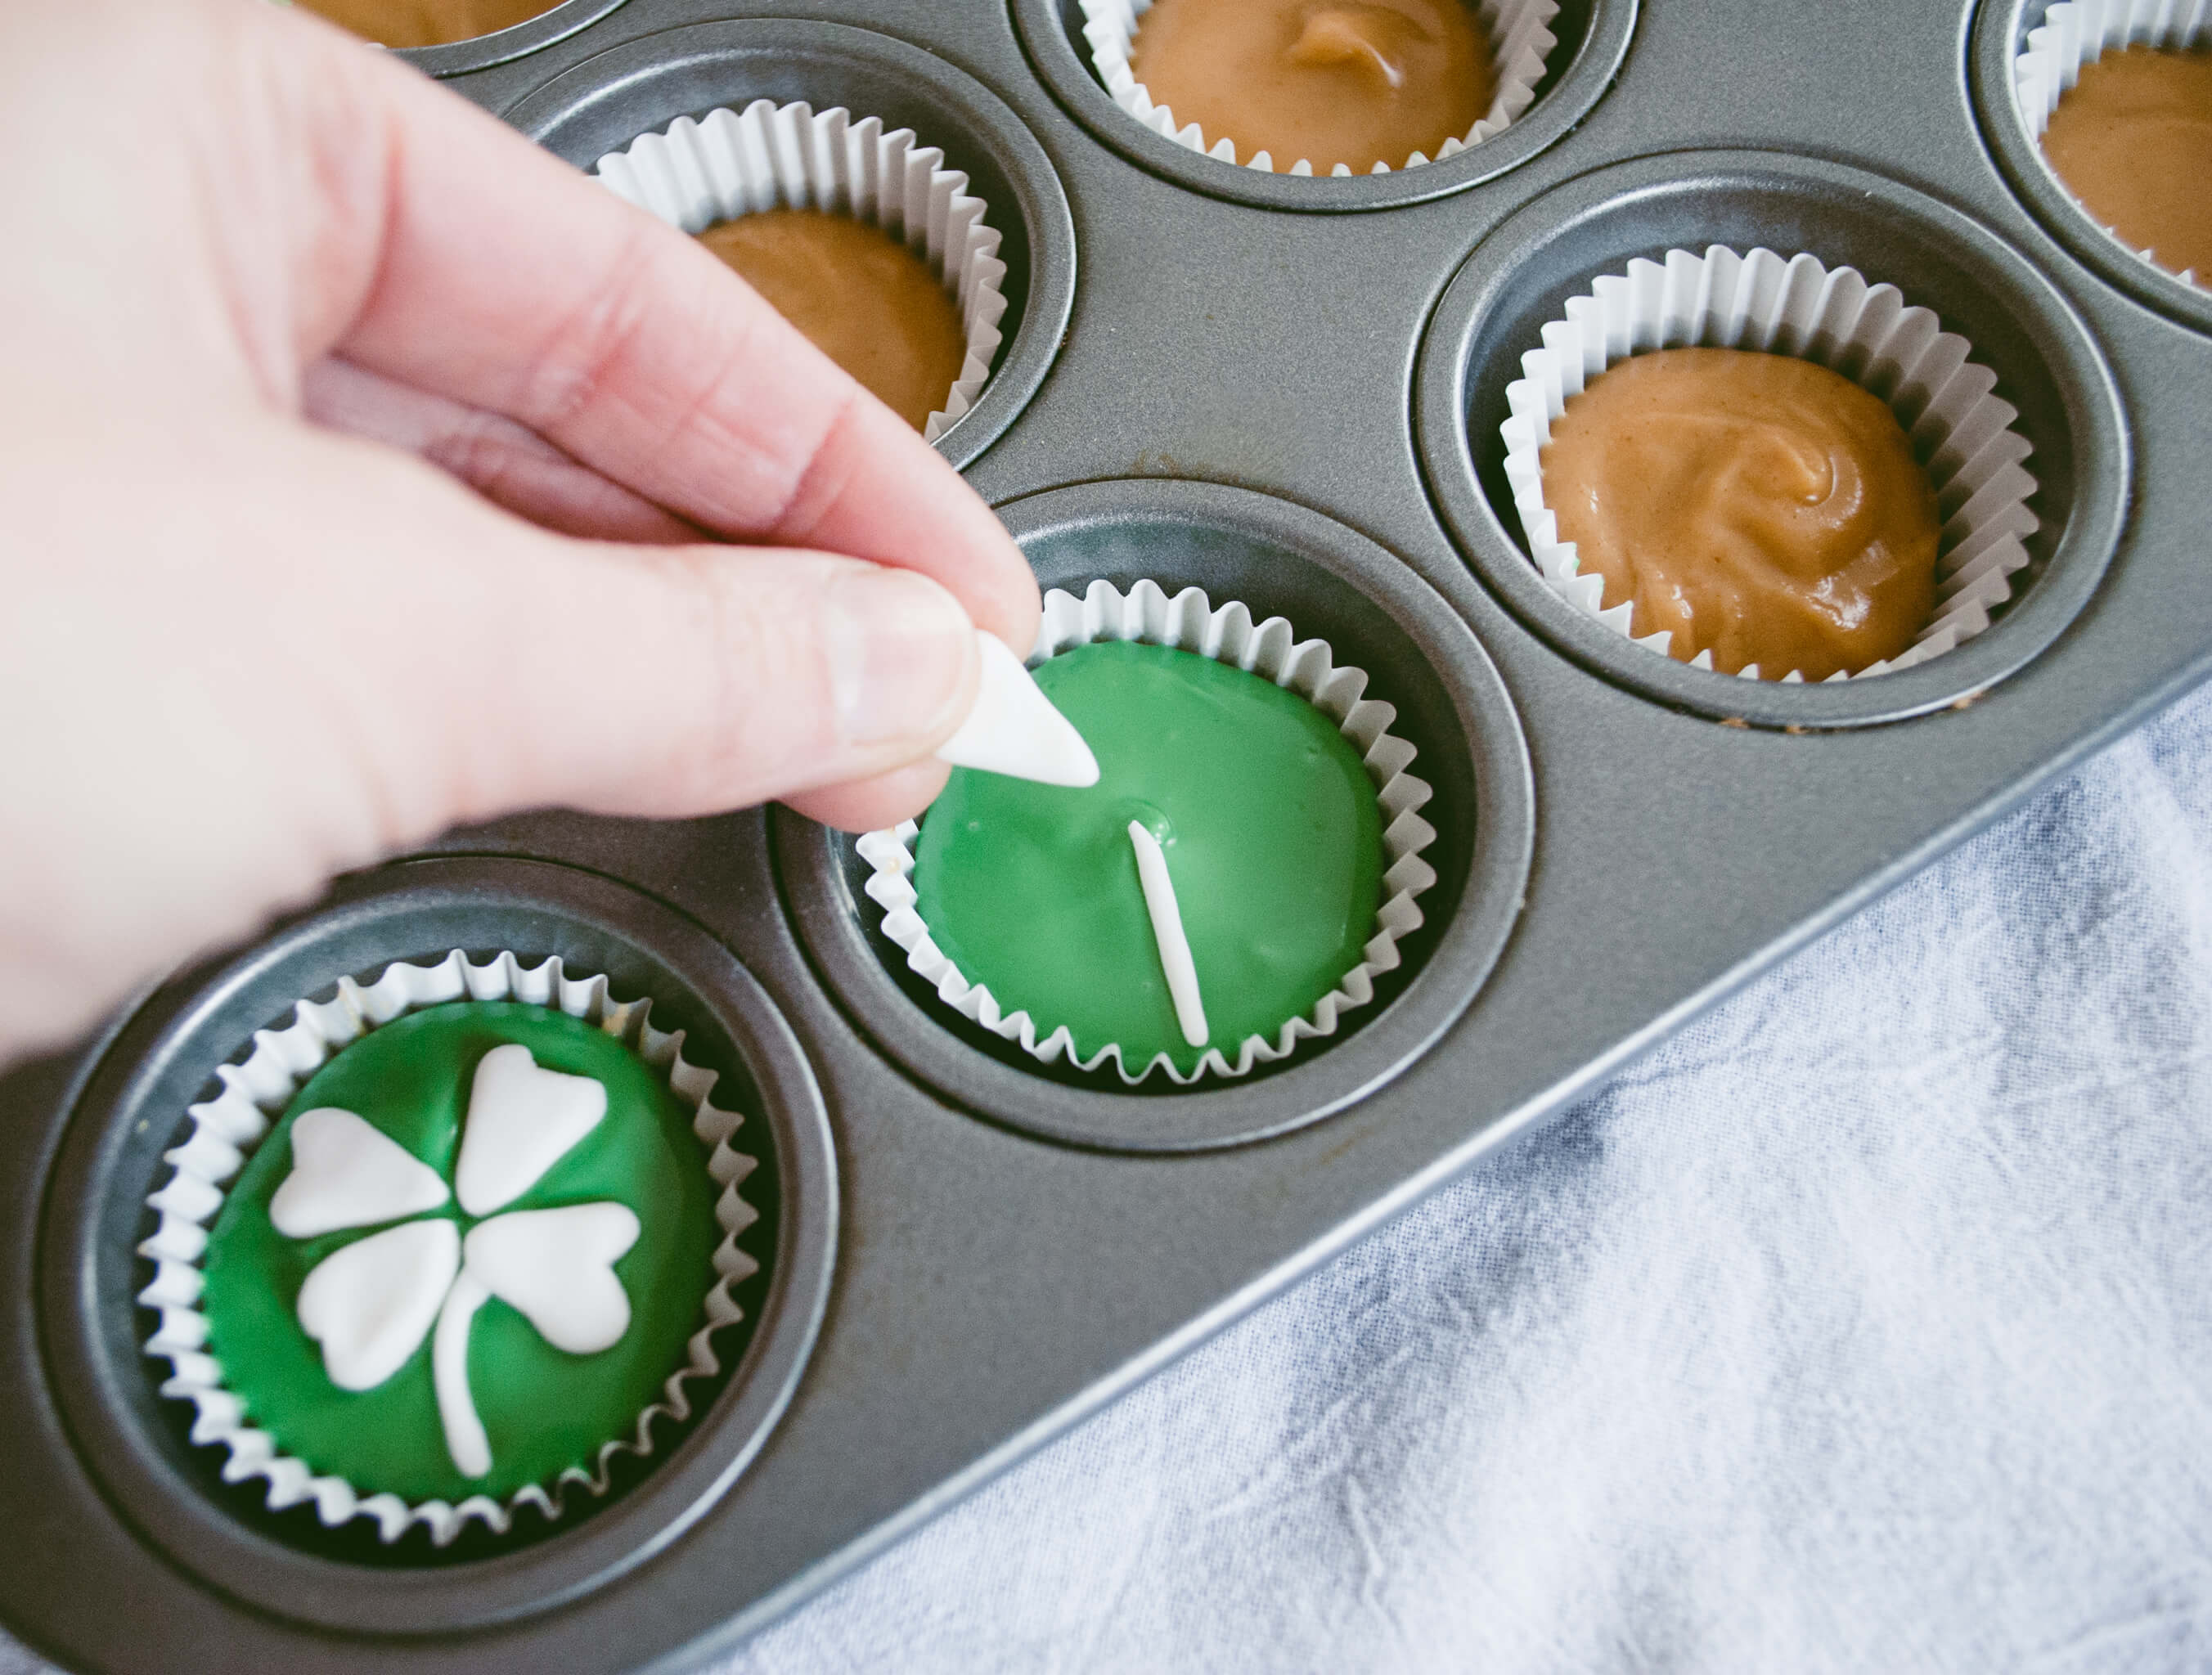 St. Patrick's Day Chocolate Peanut Butter Cups Recipe. Make these lucky green chocolate peanut butter cups for your little leprechauns.